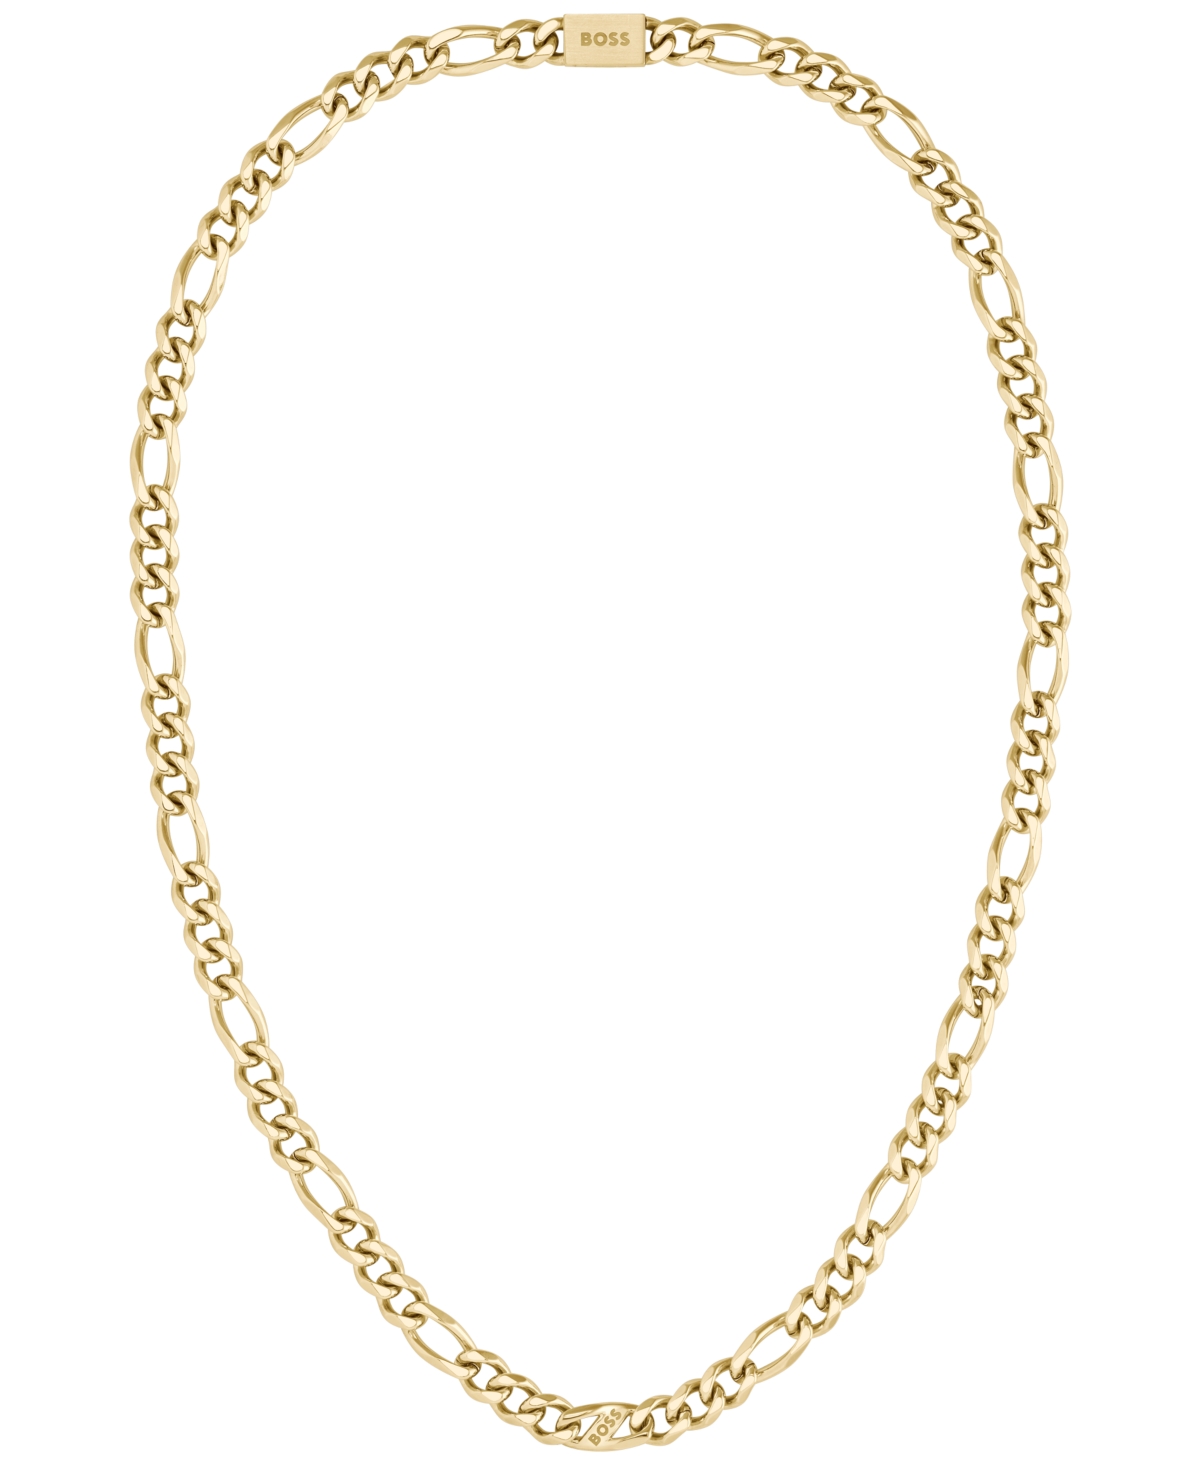 Men's Rian Ionic Plated Thin Gold-Tone Steel Necklace - Gold